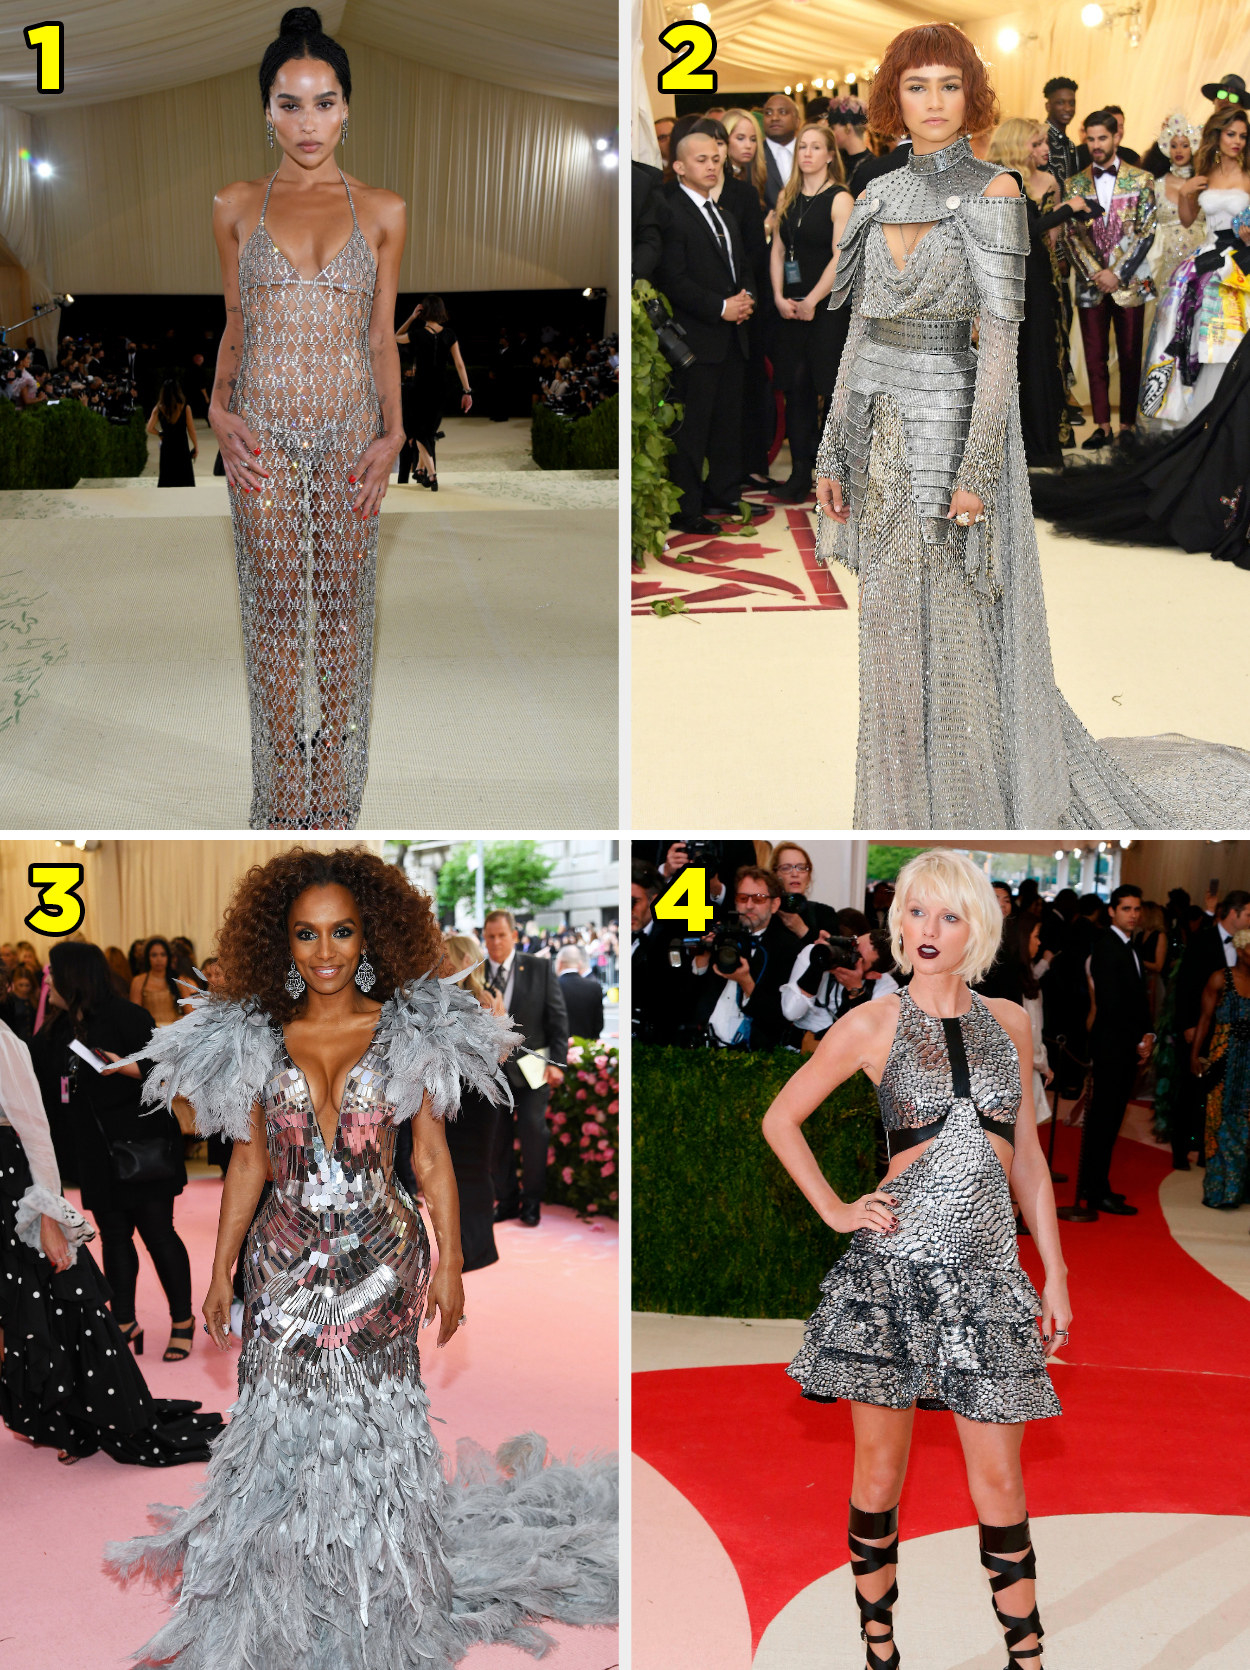 1. A mesh overlay gown thats totally see through. 2. A metal gown that looks like Joan of Arc. 3. A trumpet style gown with feathers at the shoulders and skirt. 4. a short gown with a snakeskin pattern.